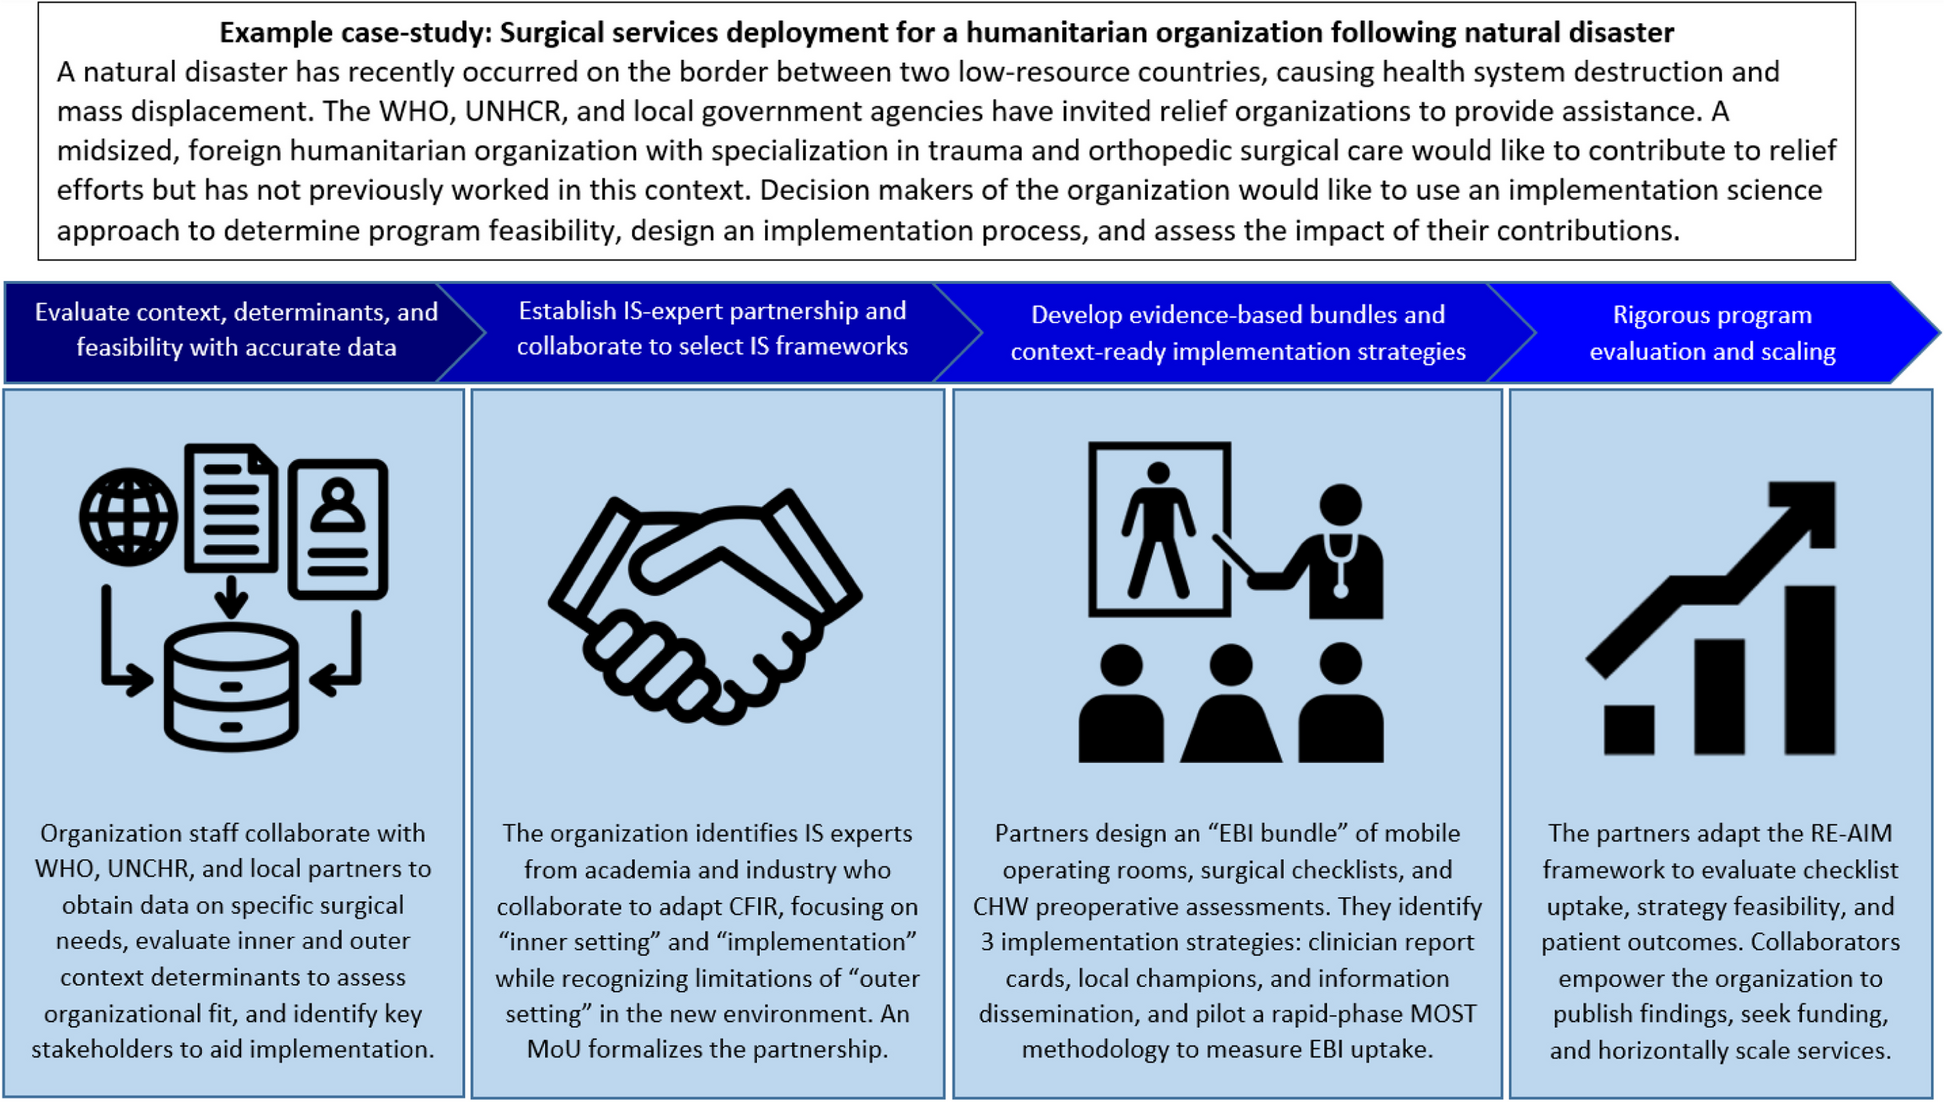 Implementation science in humanitarian assistance: applying a novel approach for humanitarian care optimization